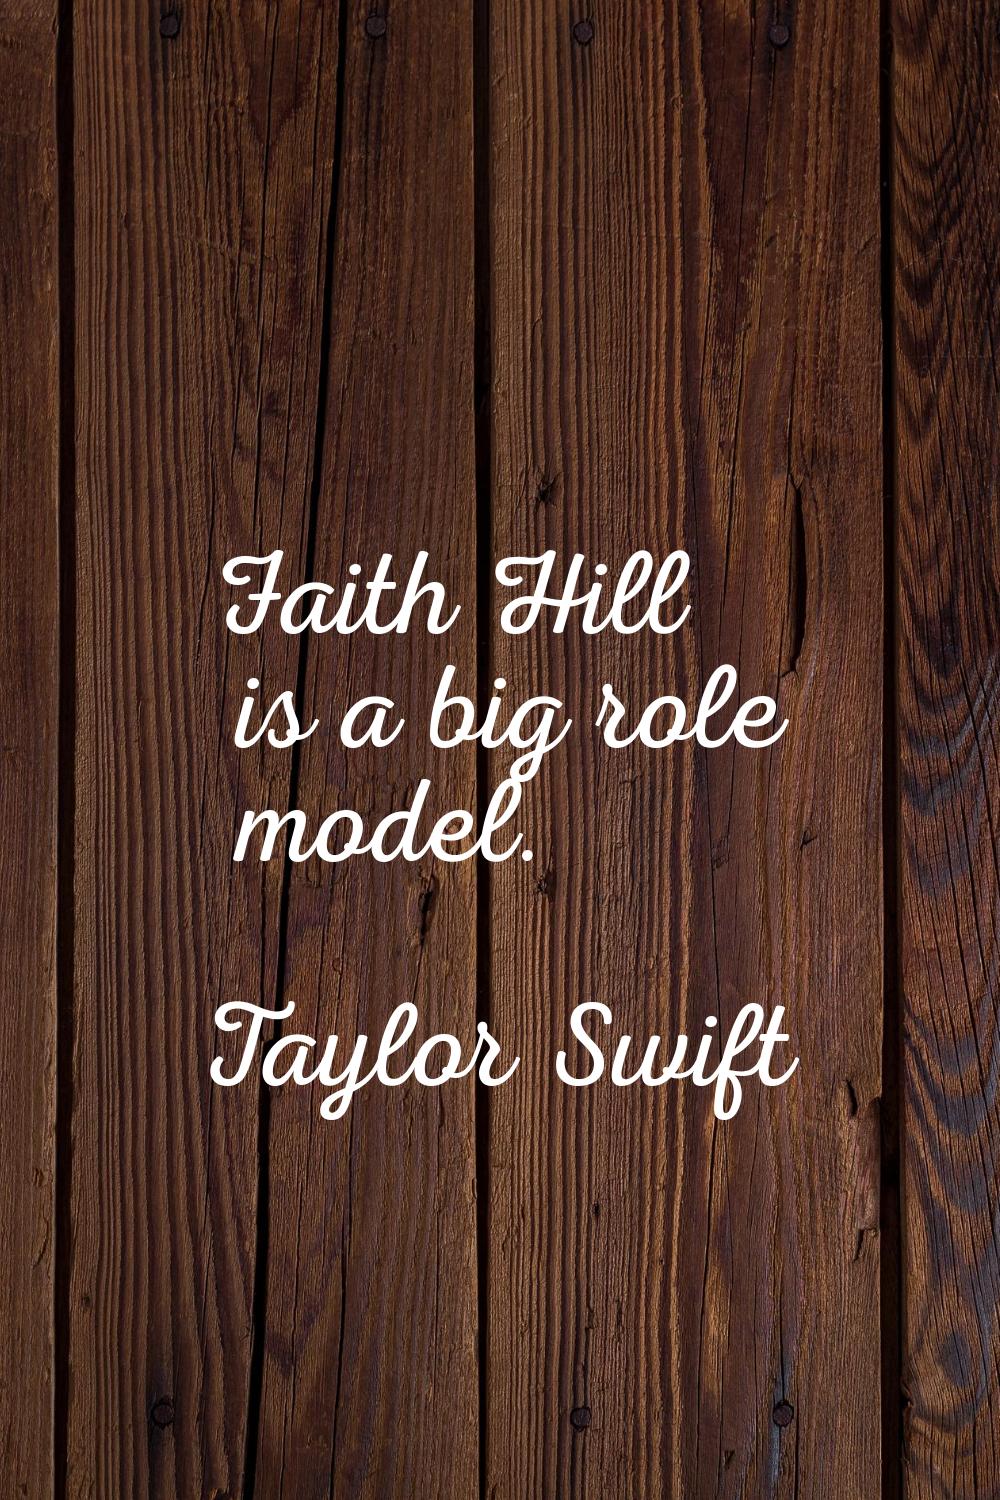 Faith Hill is a big role model.